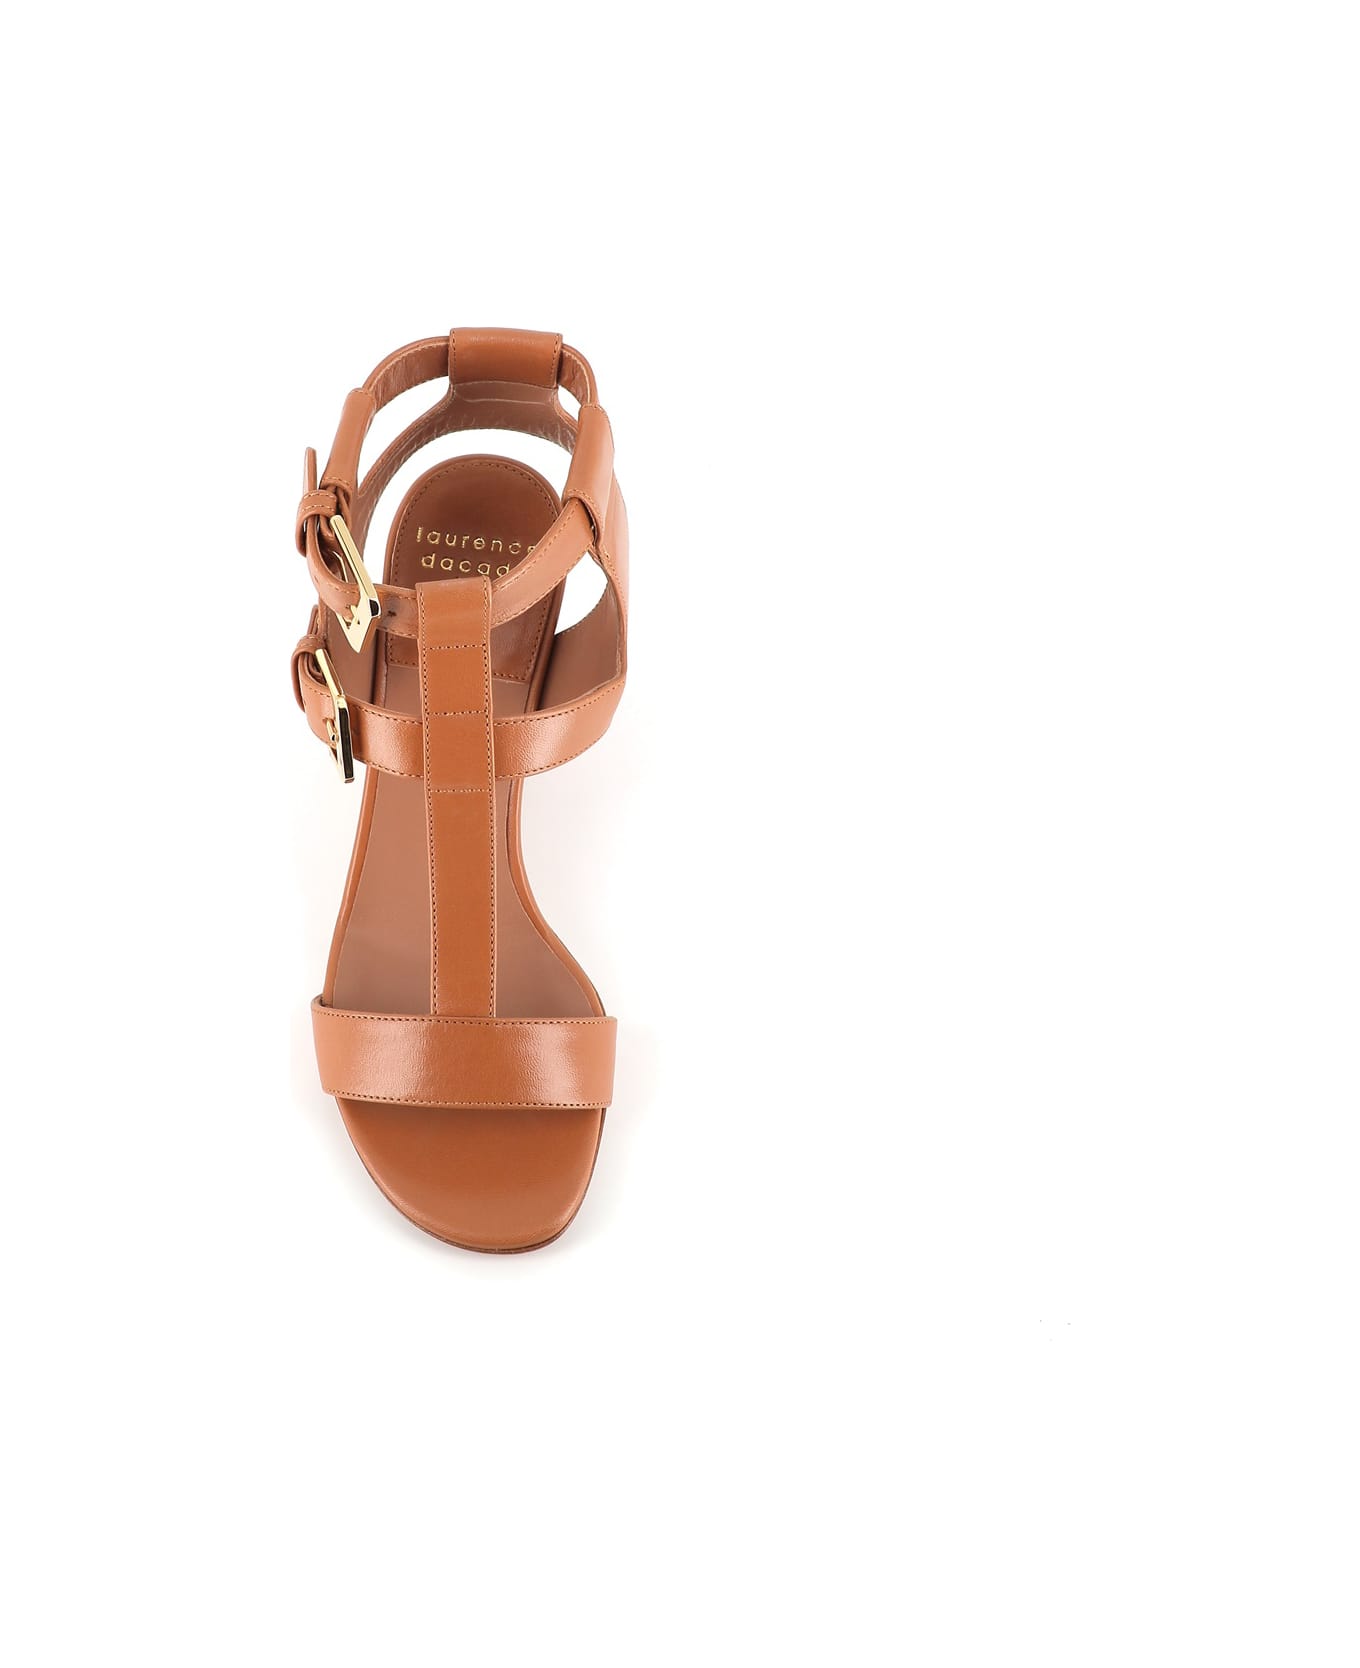 Laurence Dacade Sandal Helie - Leather